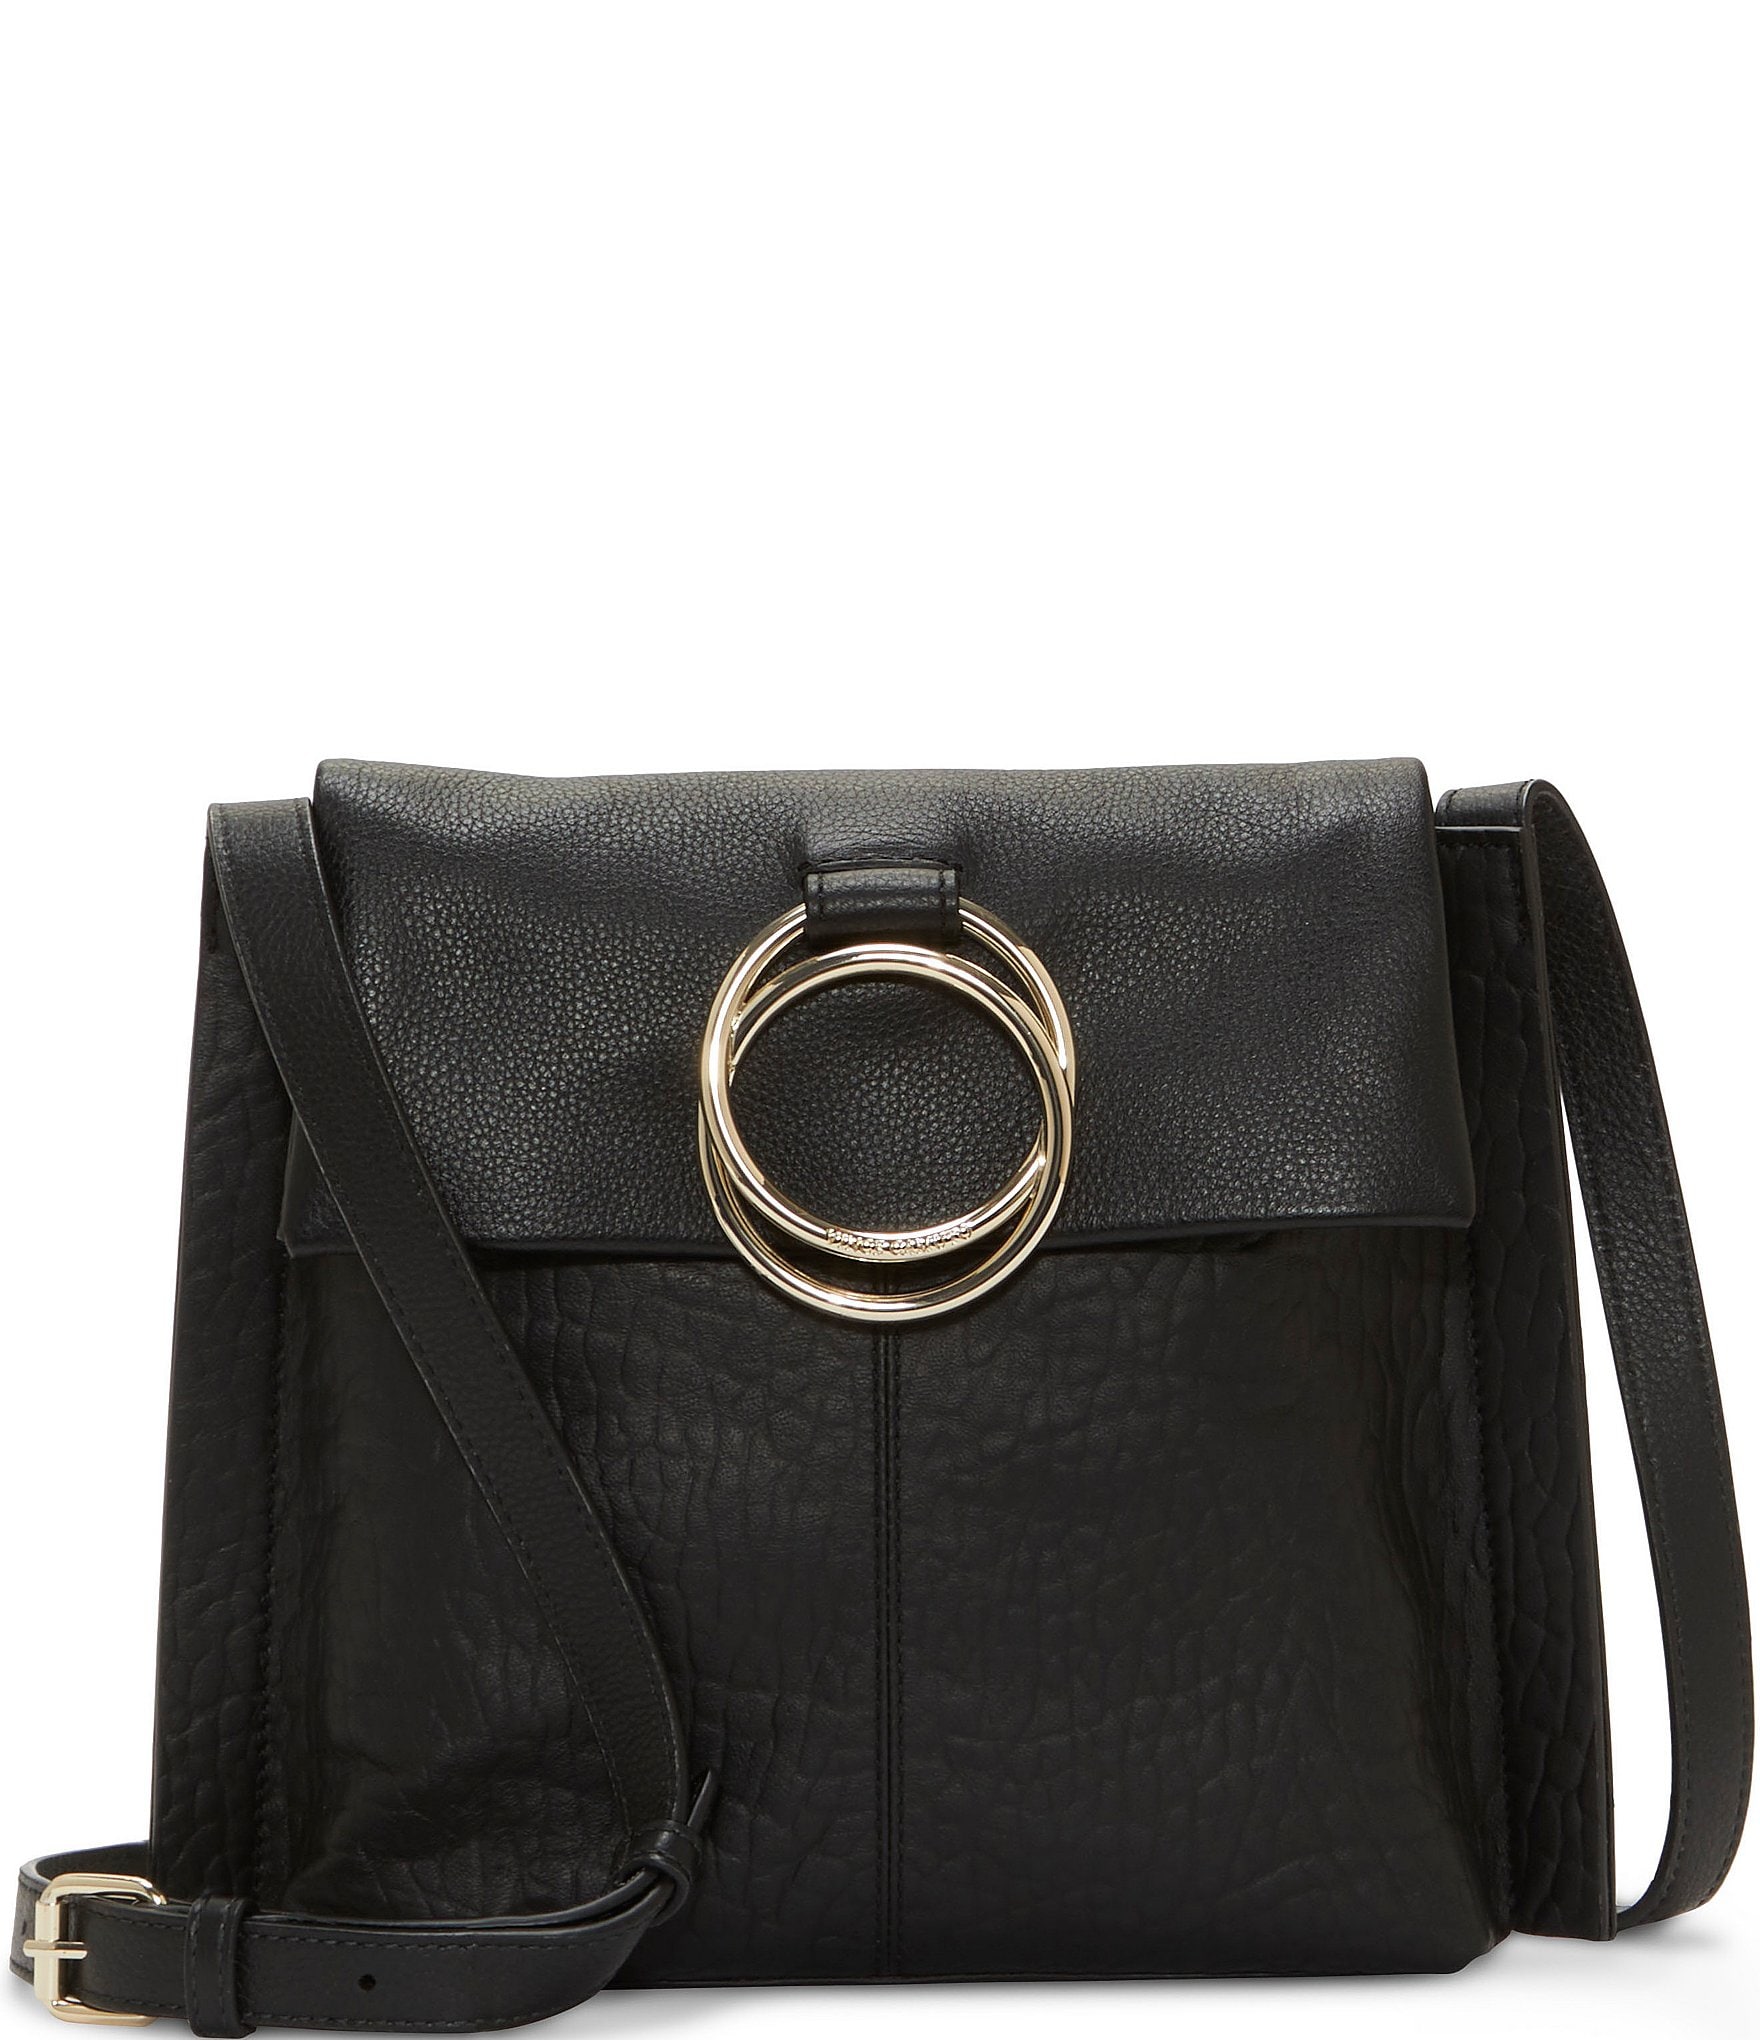 Vince Camuto Livy Large Leather Crossbody Bag - Black Ox